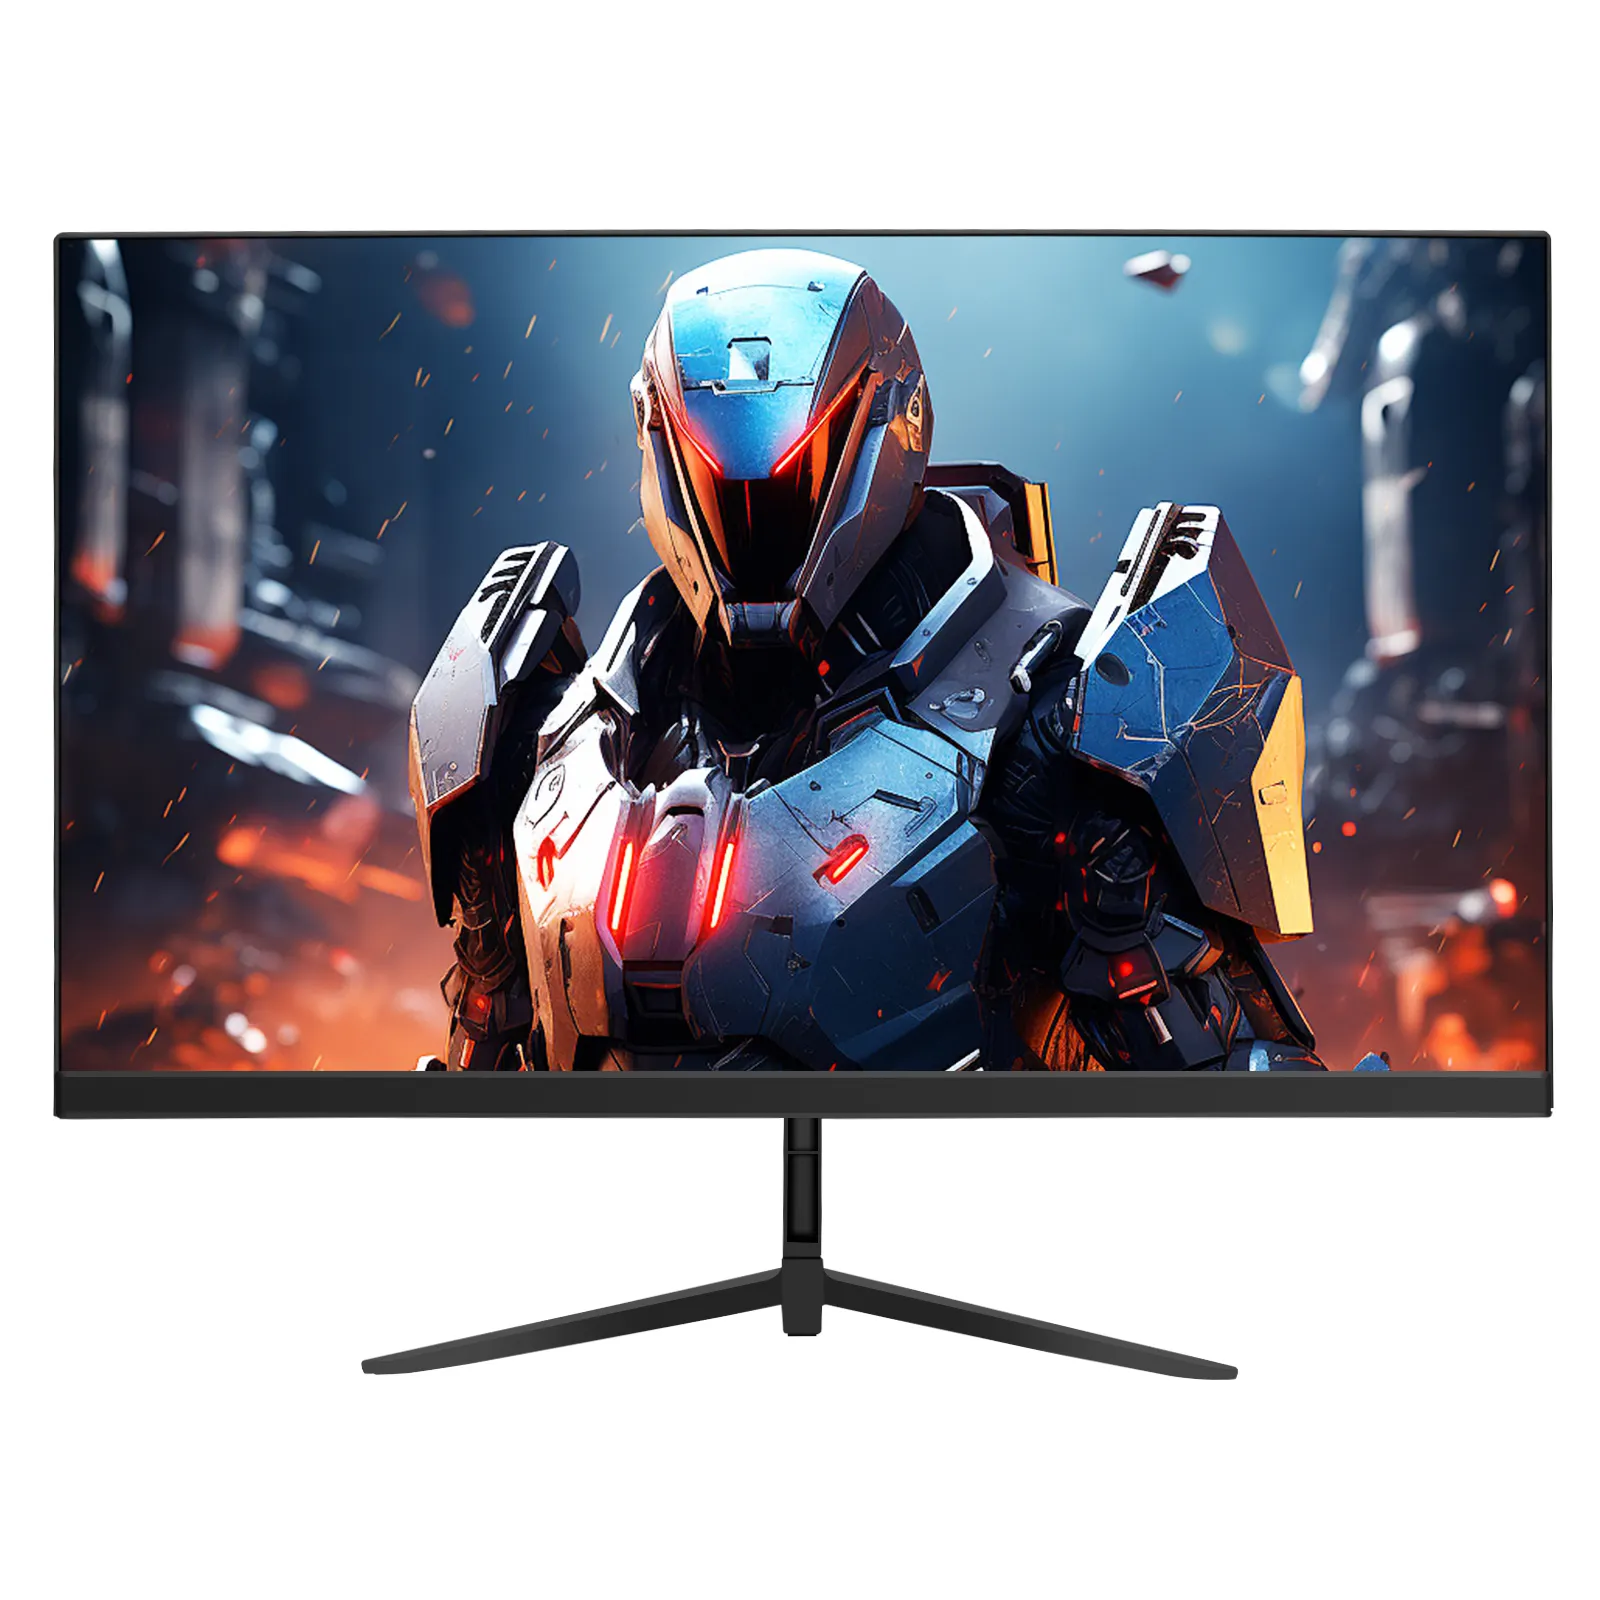 24 Inch LED Office/Gaming Monitor with RGB Lighting  Tilting V Shape Standing Bracket for Desktop Use  Supporting OEM